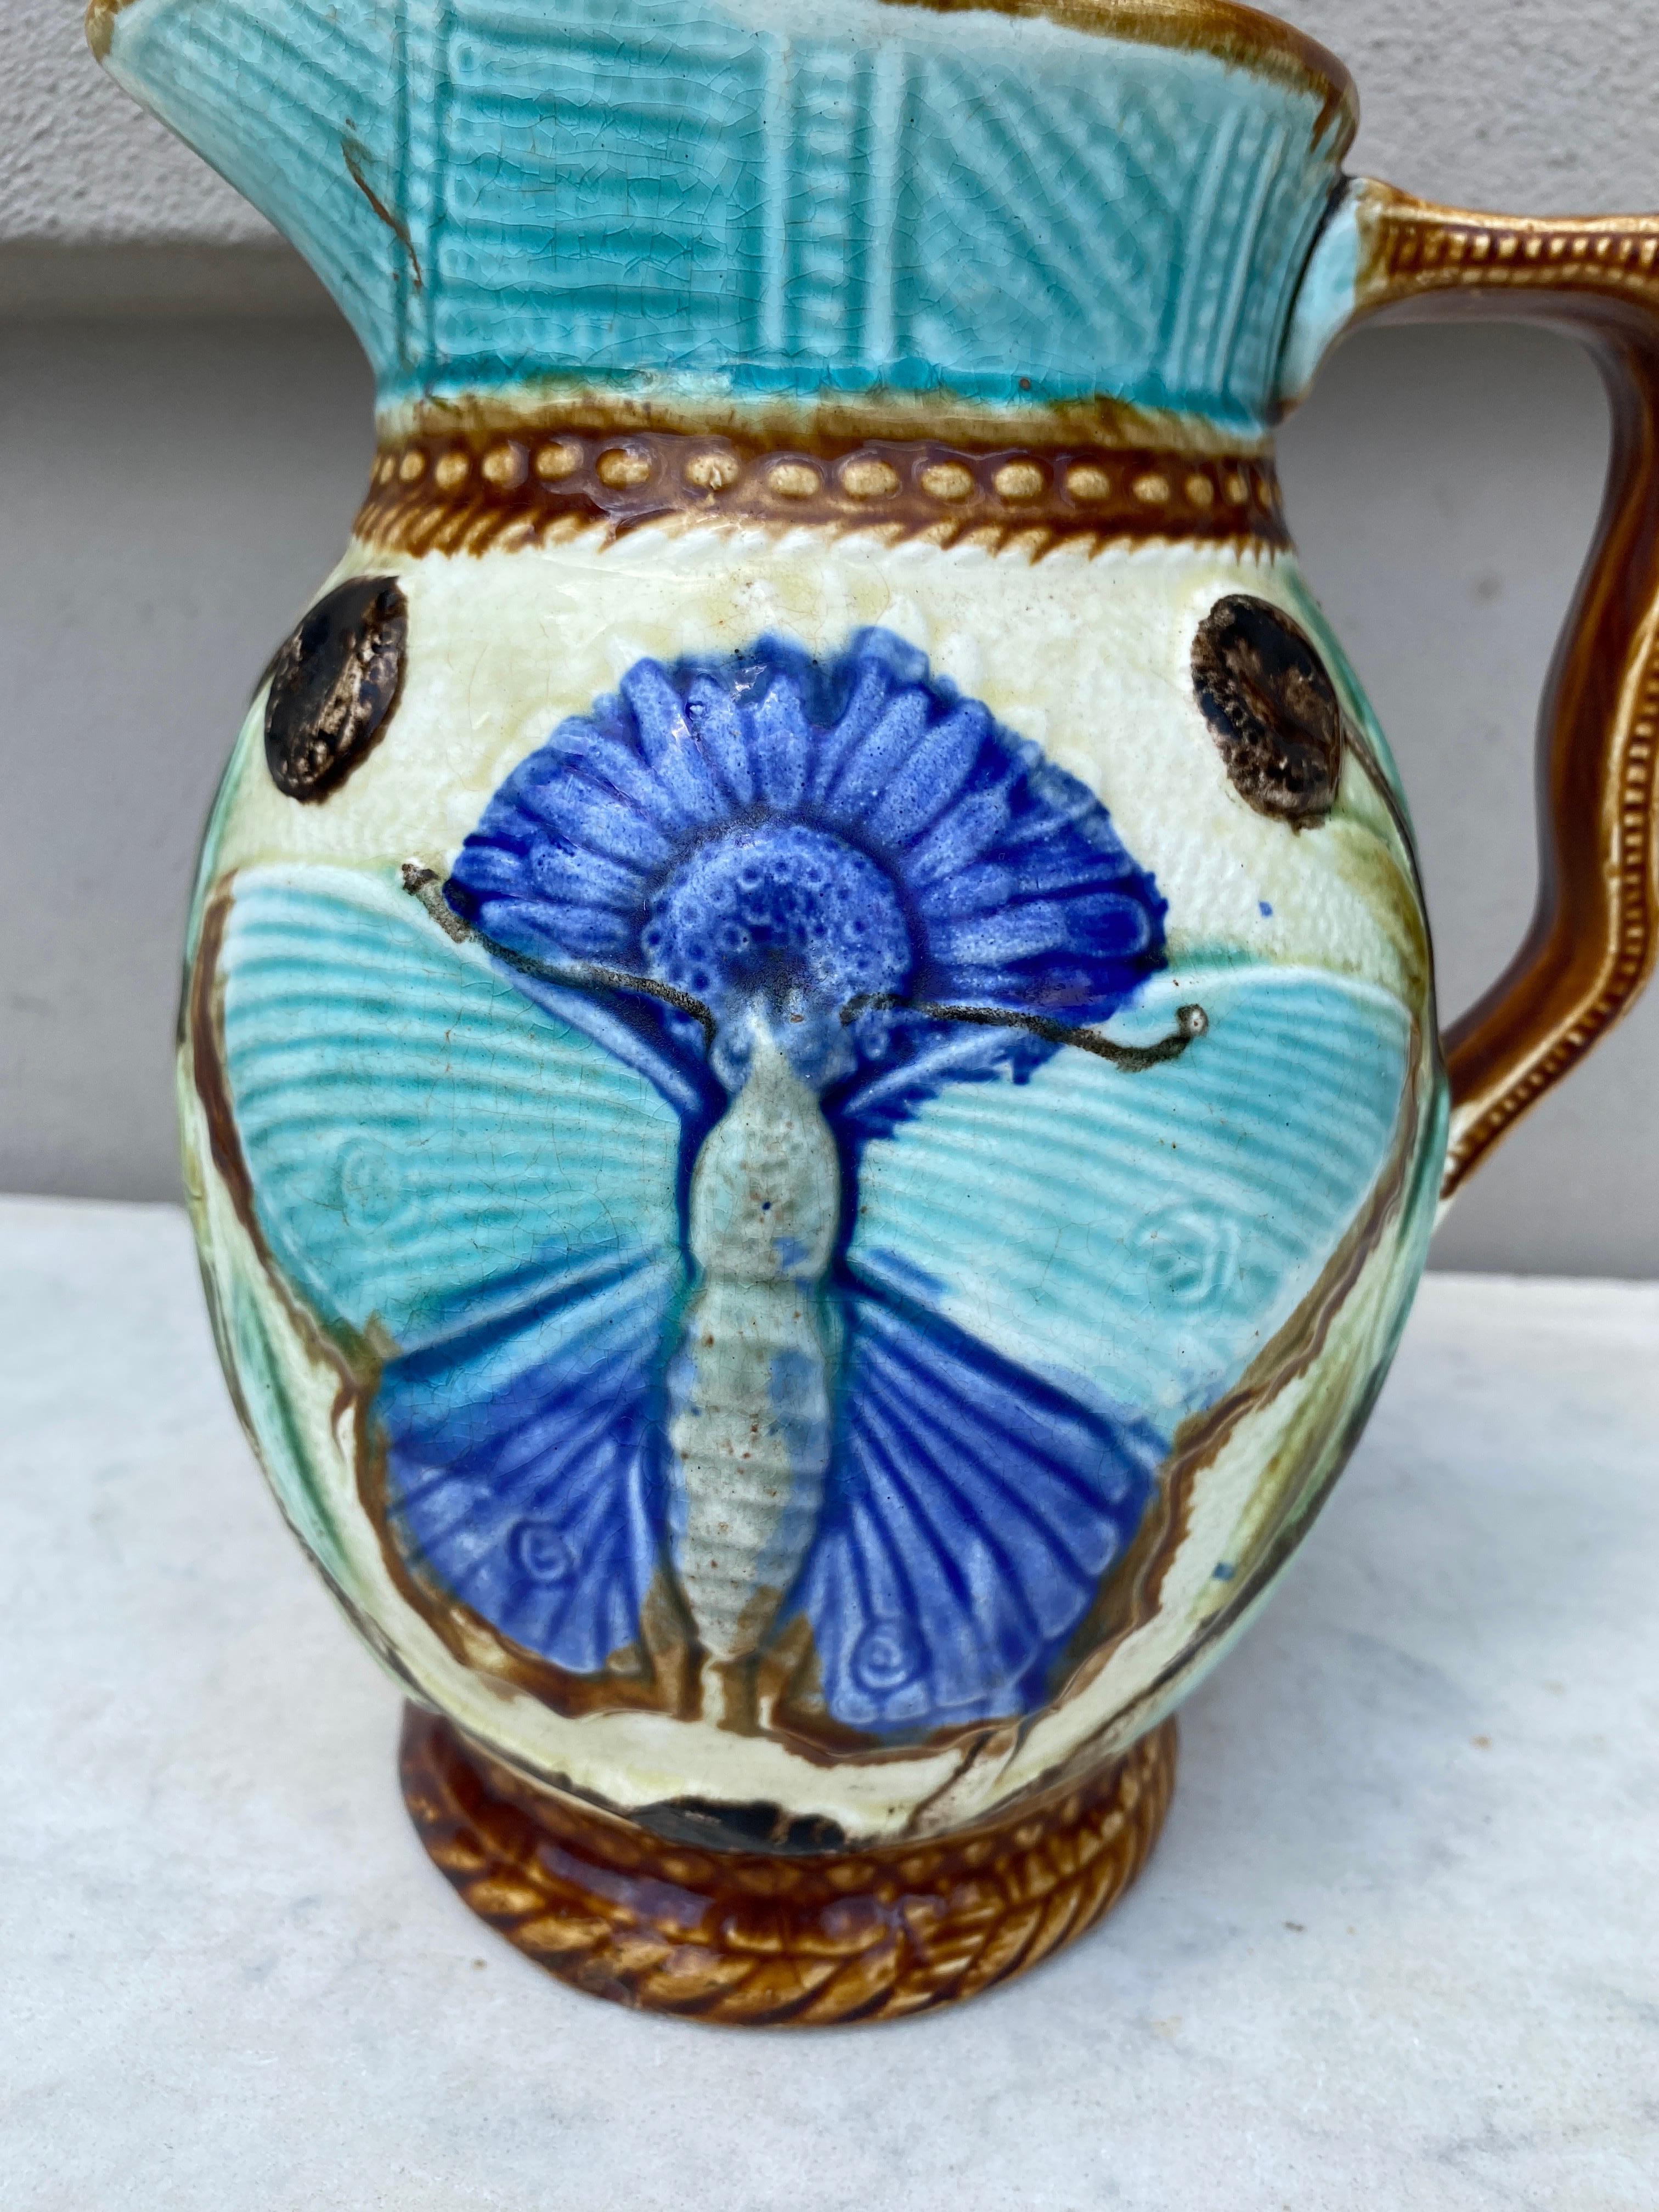 Large 19th century Belgium Majolica pitcher Wasmuel with a butterfly.